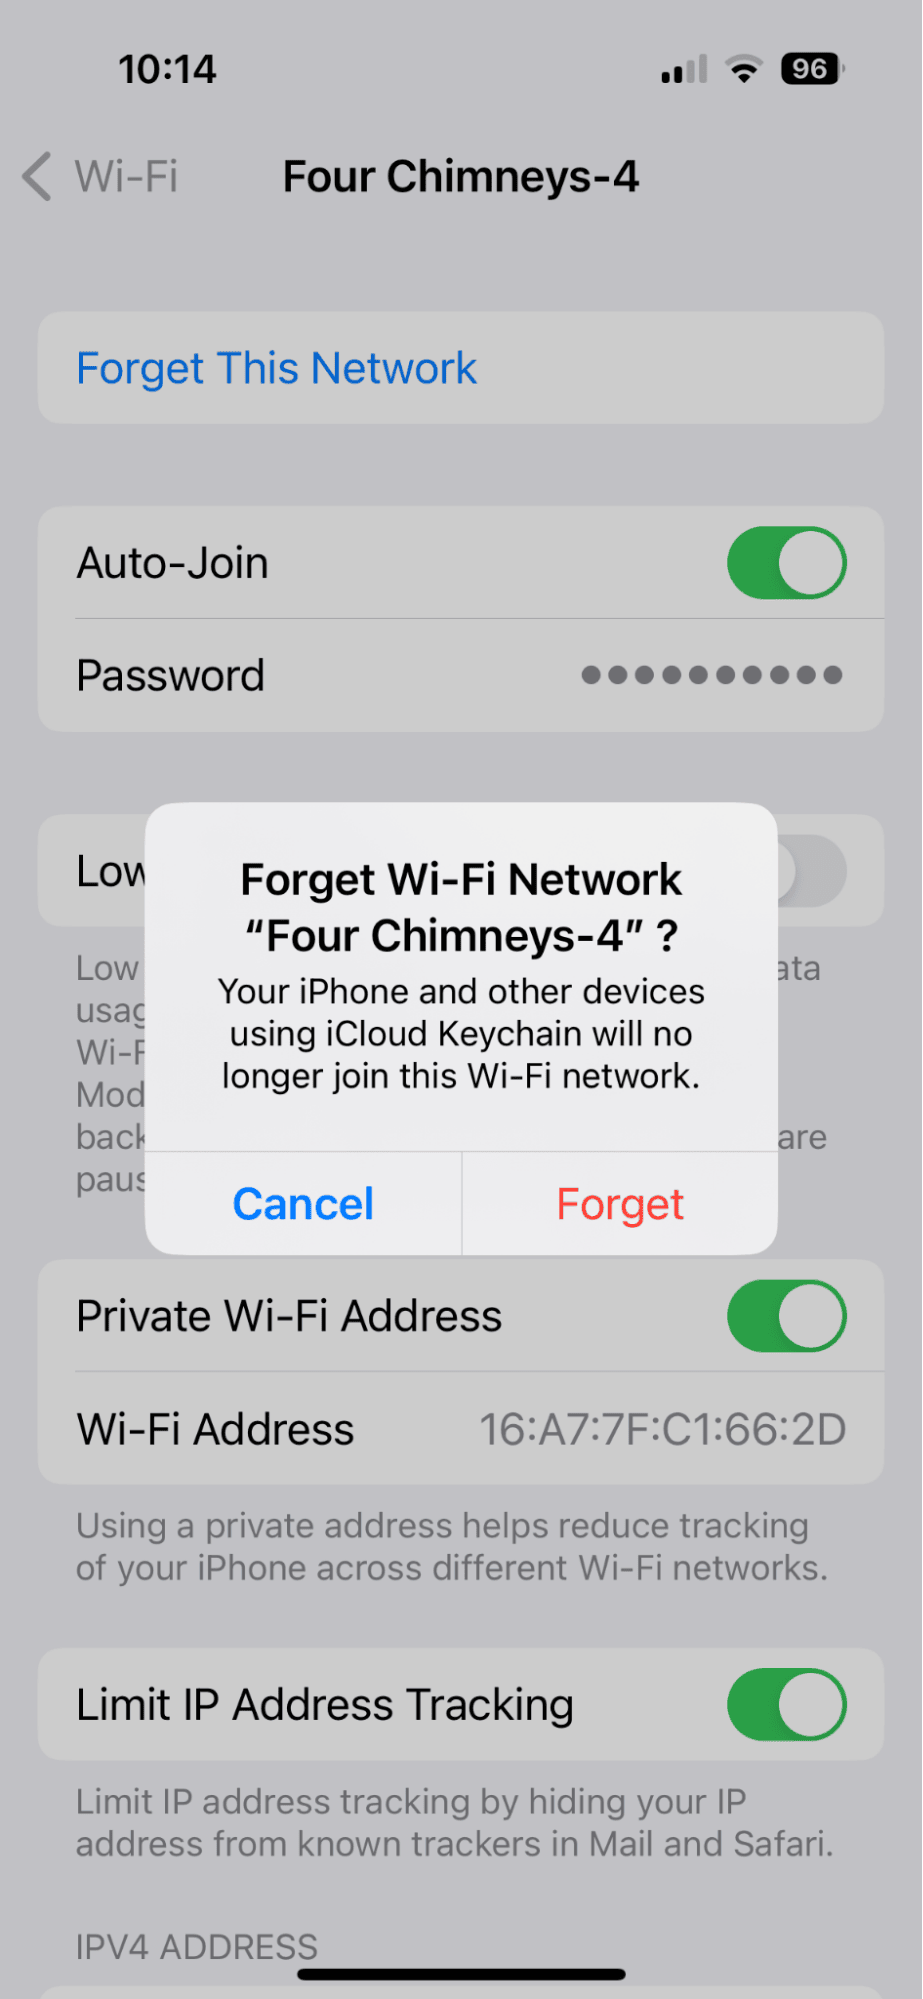 Forgetting saved Wi-Fi password on iPhone